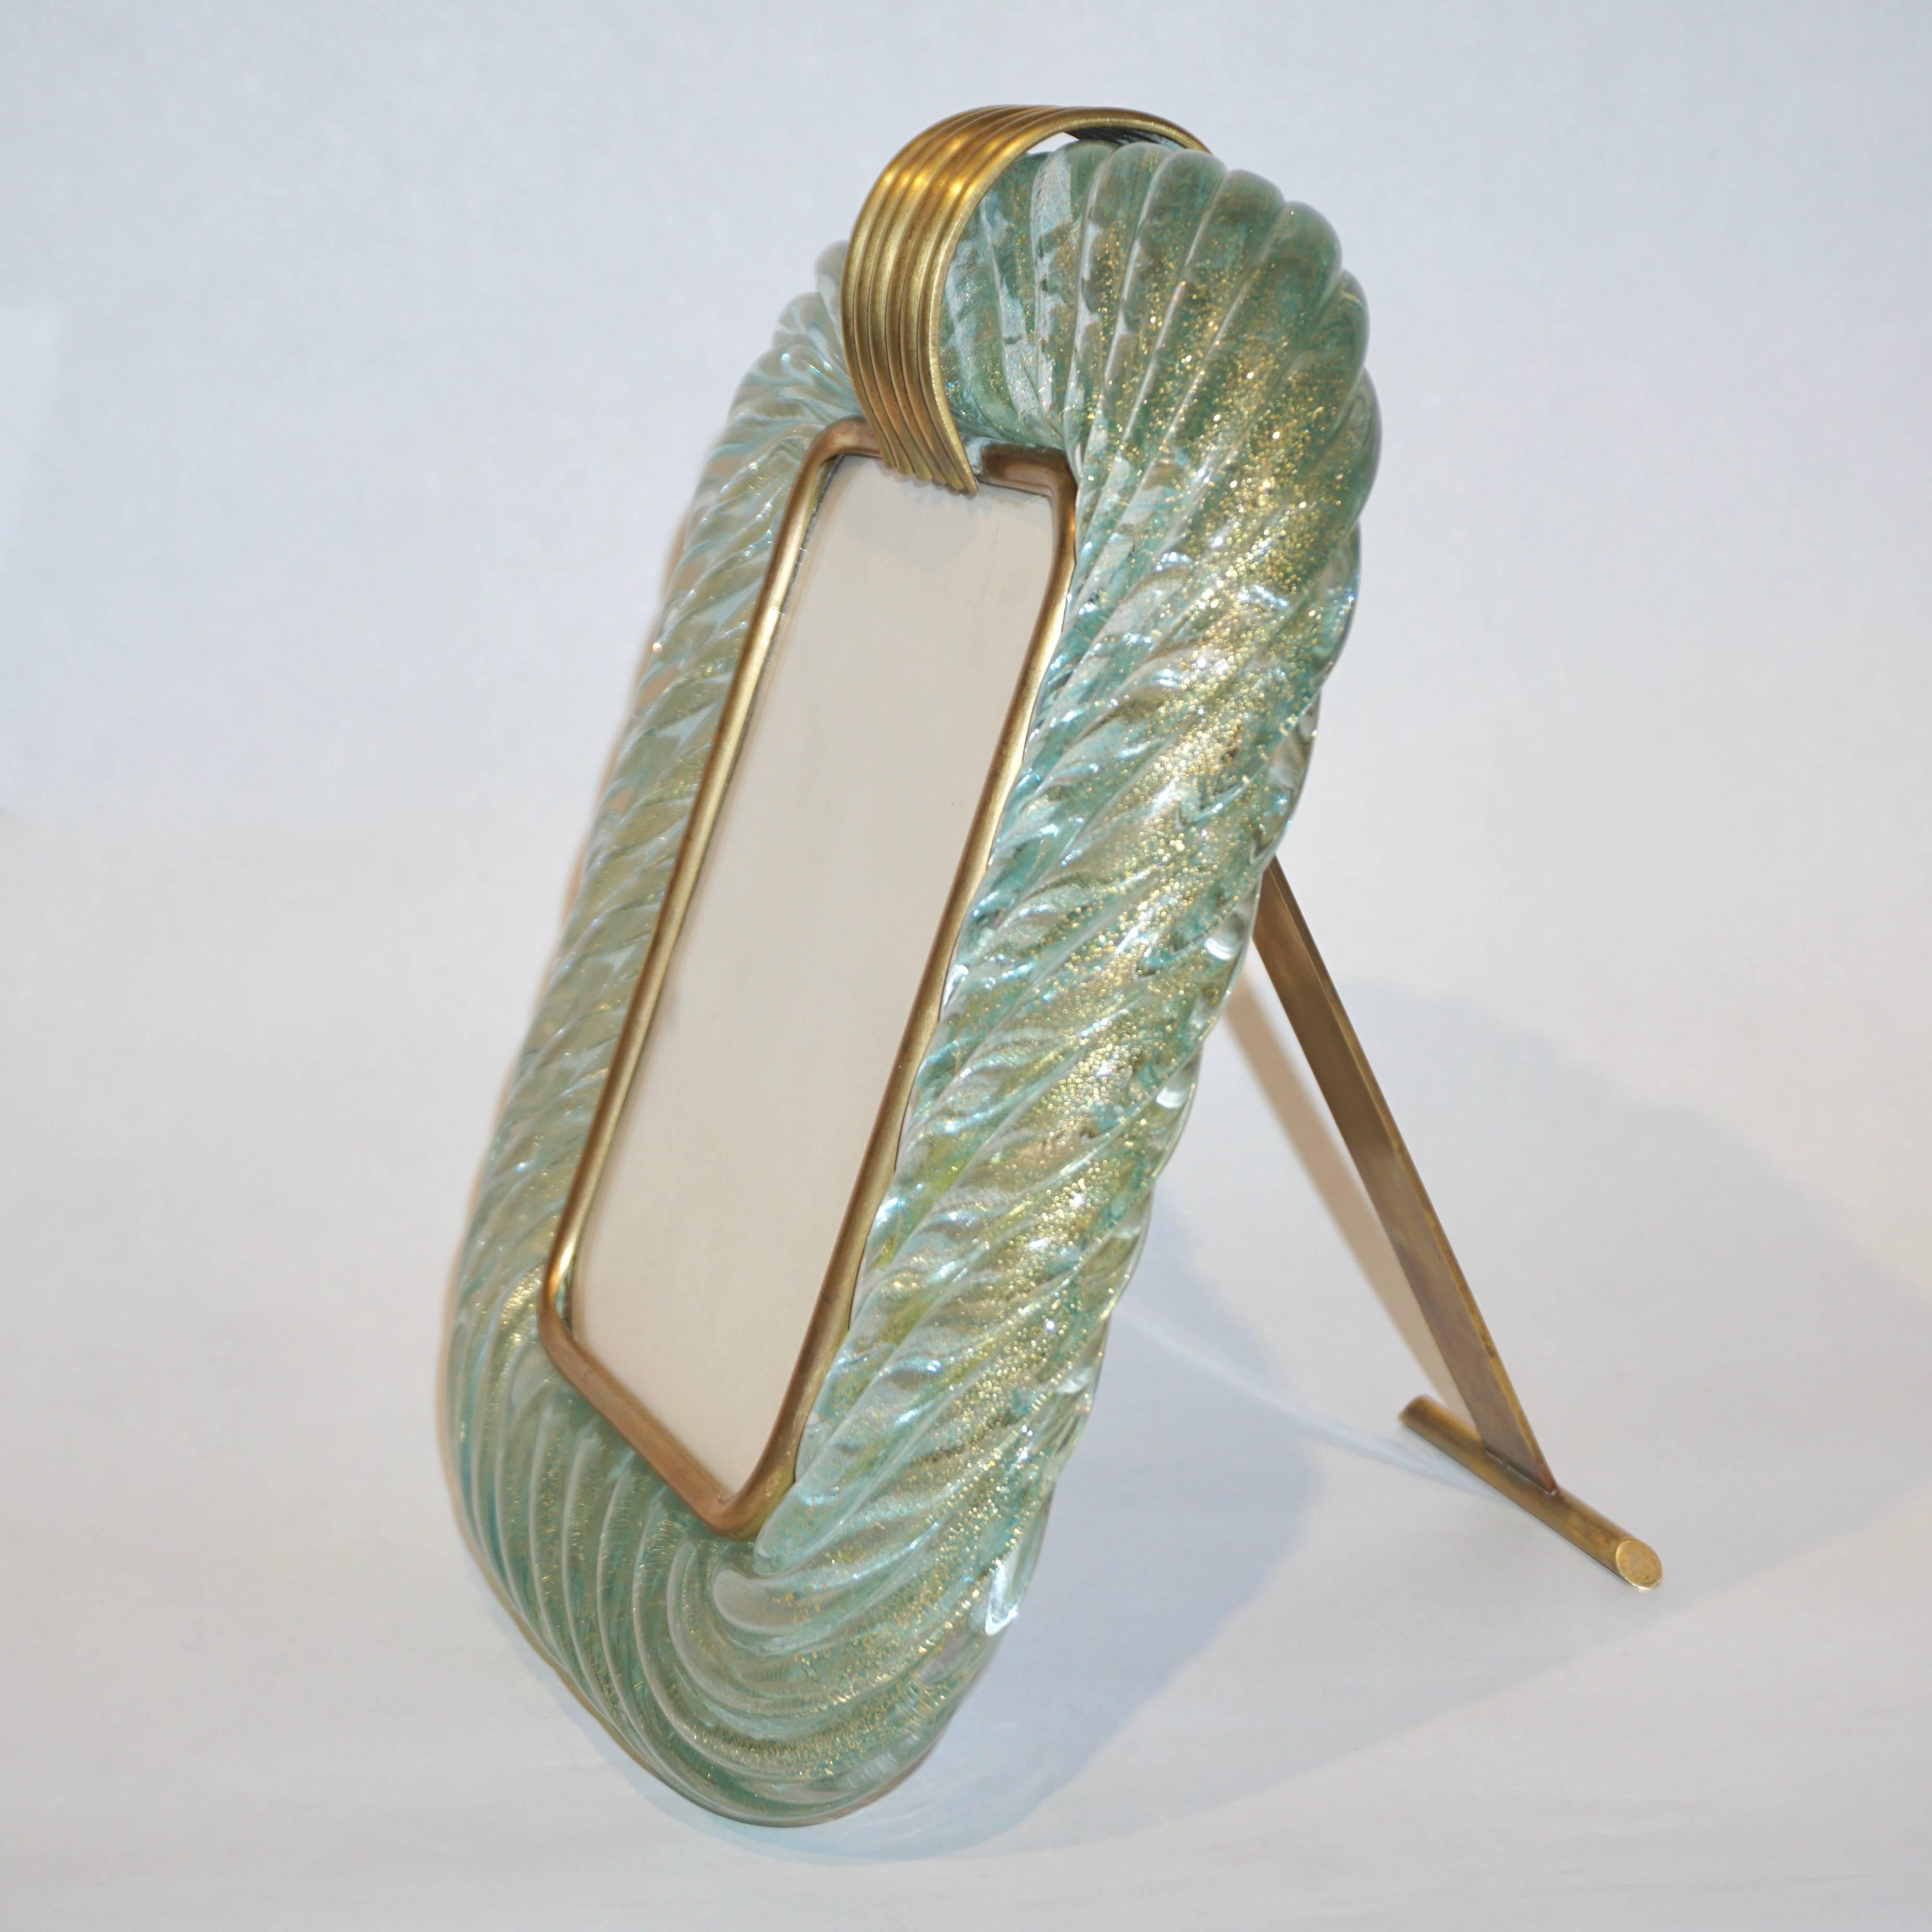 Italian Barovier Toso Vintage Twisted Gold and Aqua Blue Murano Glass Photo Frame, 1970s